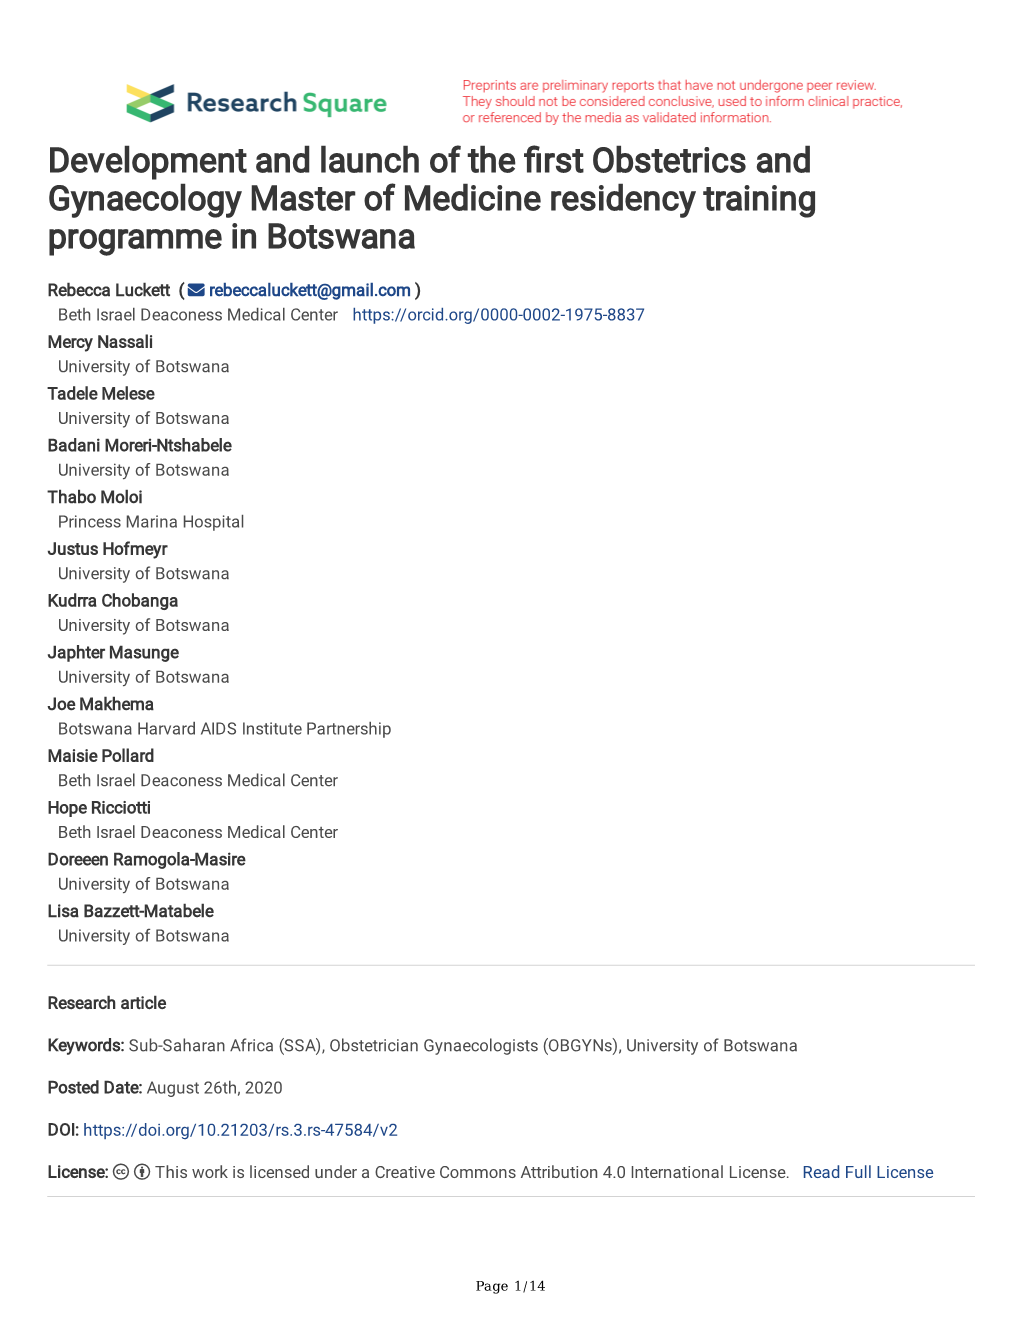 Development and Launch of the Rst Obstetrics and Gynaecology Master